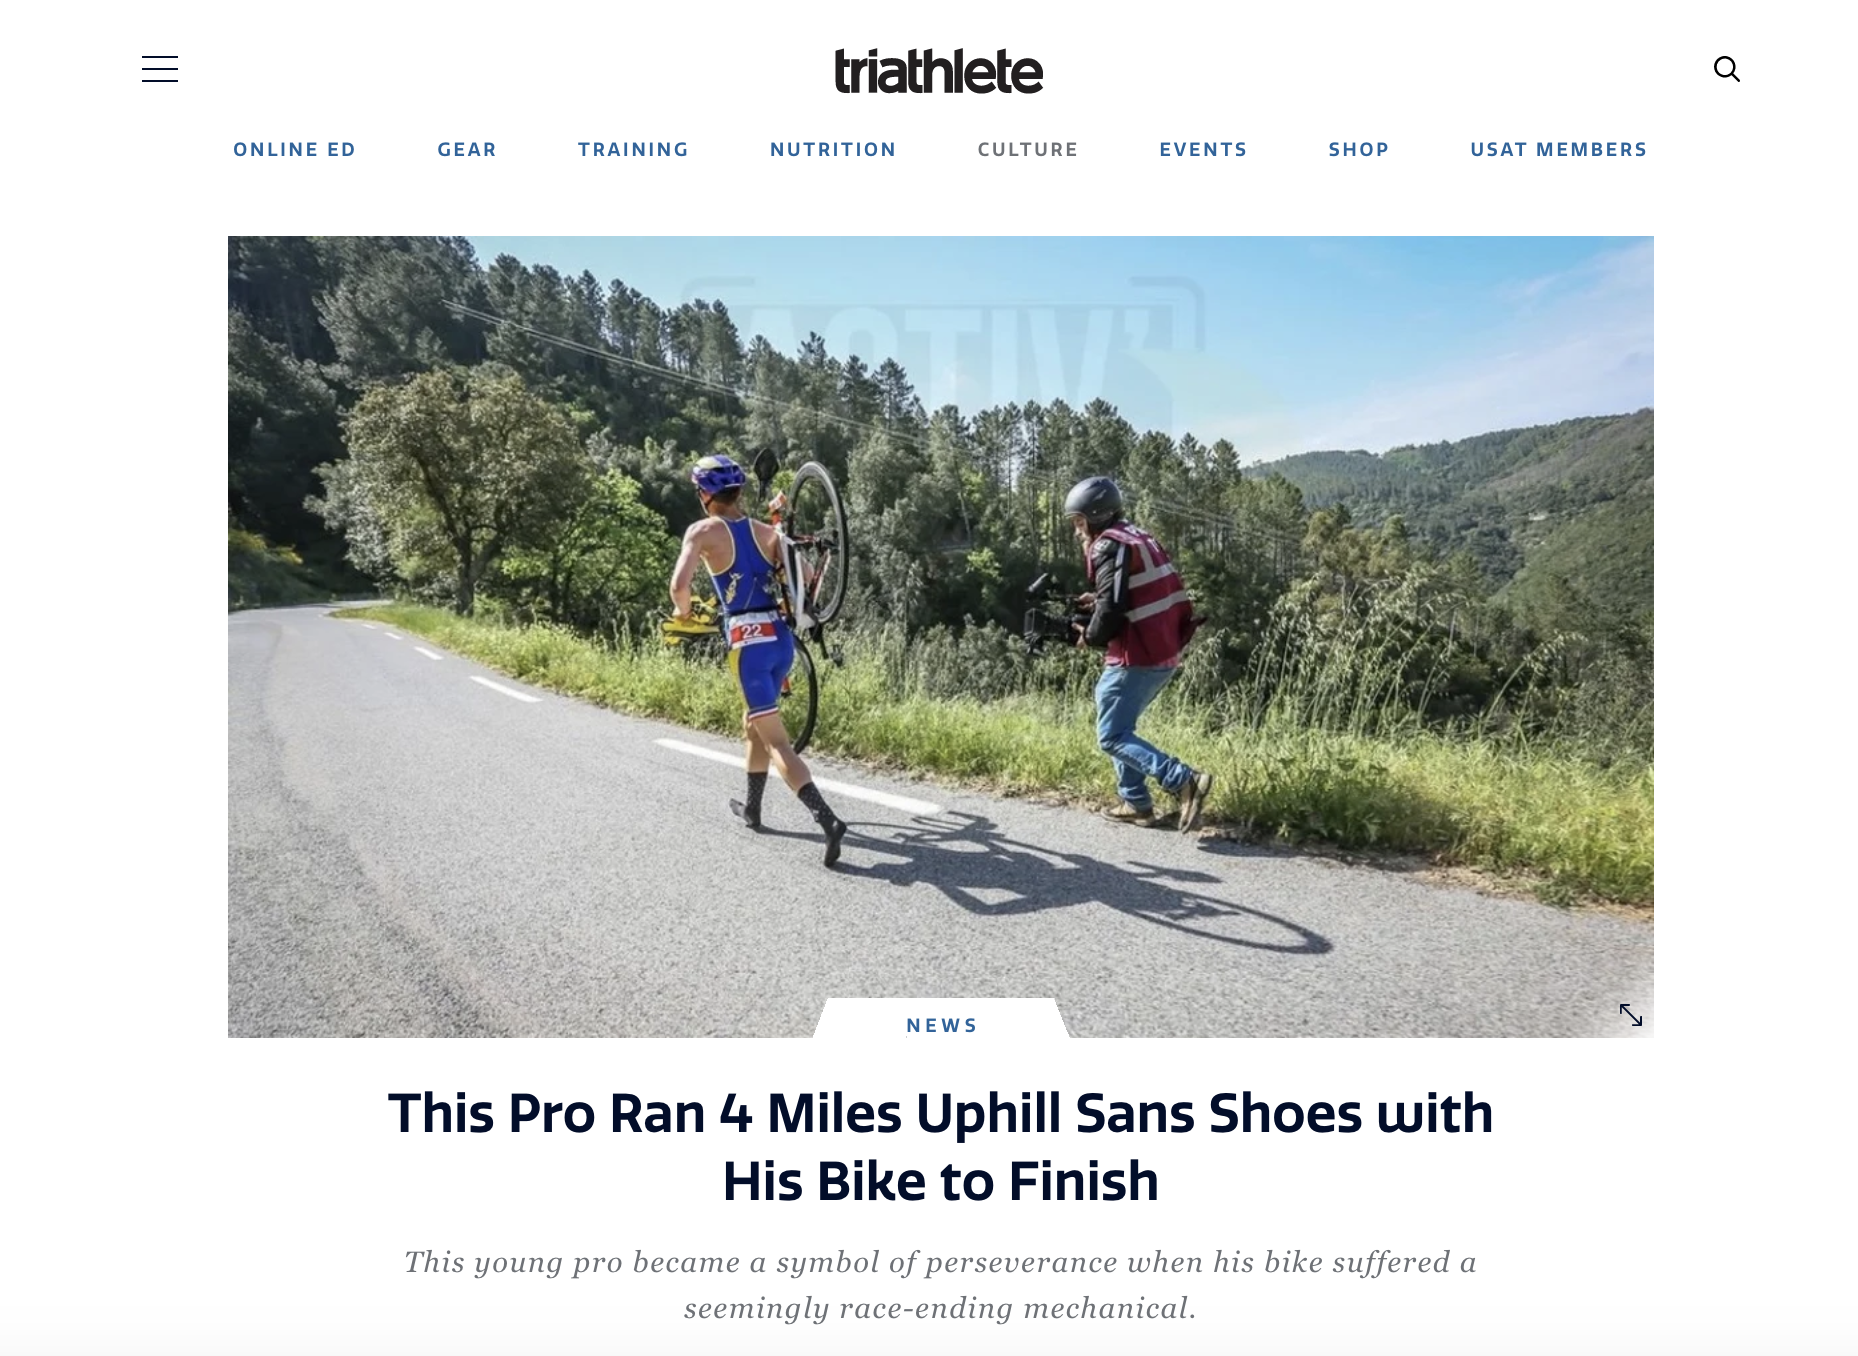 This Pro Ran 4 Miles Uphill Sans Shoes with His Bike to Finish